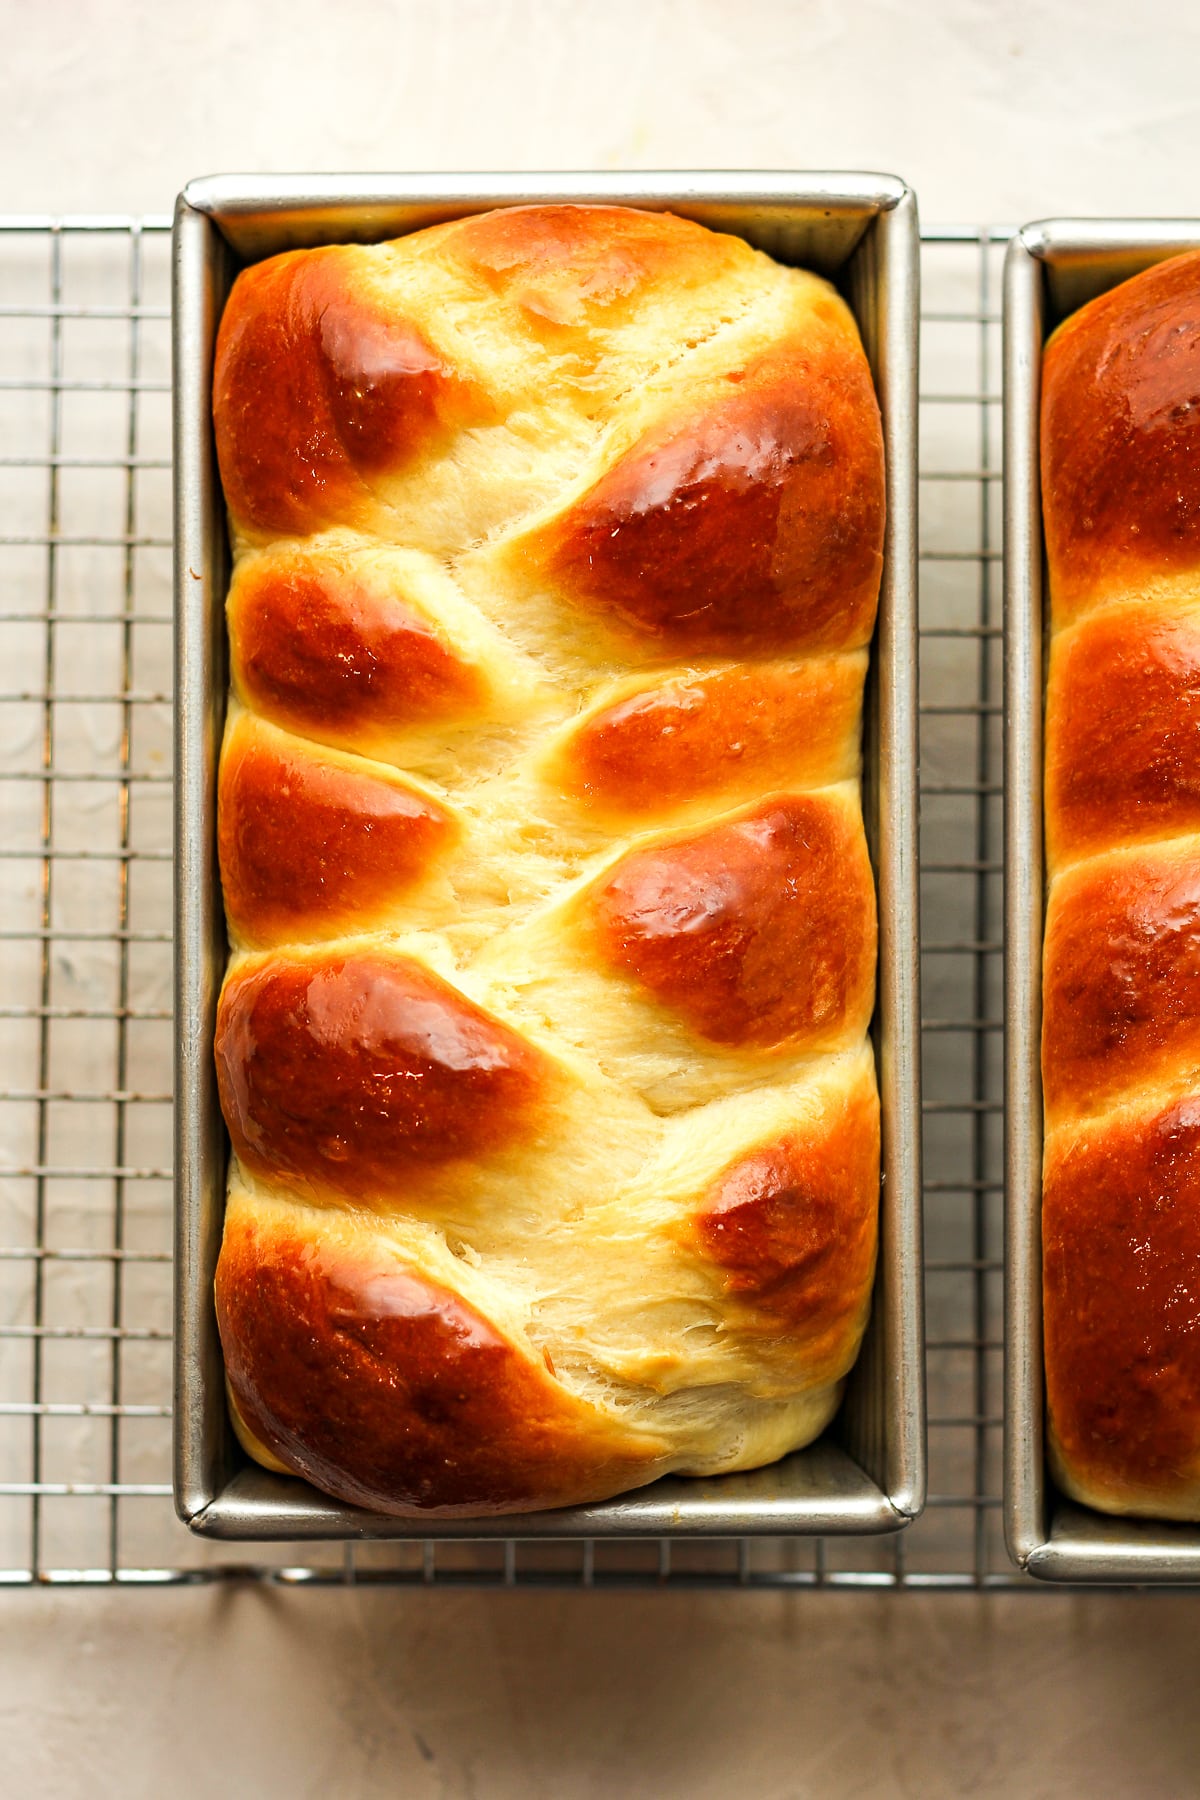 Two loaves of baked brioche bread - braided.